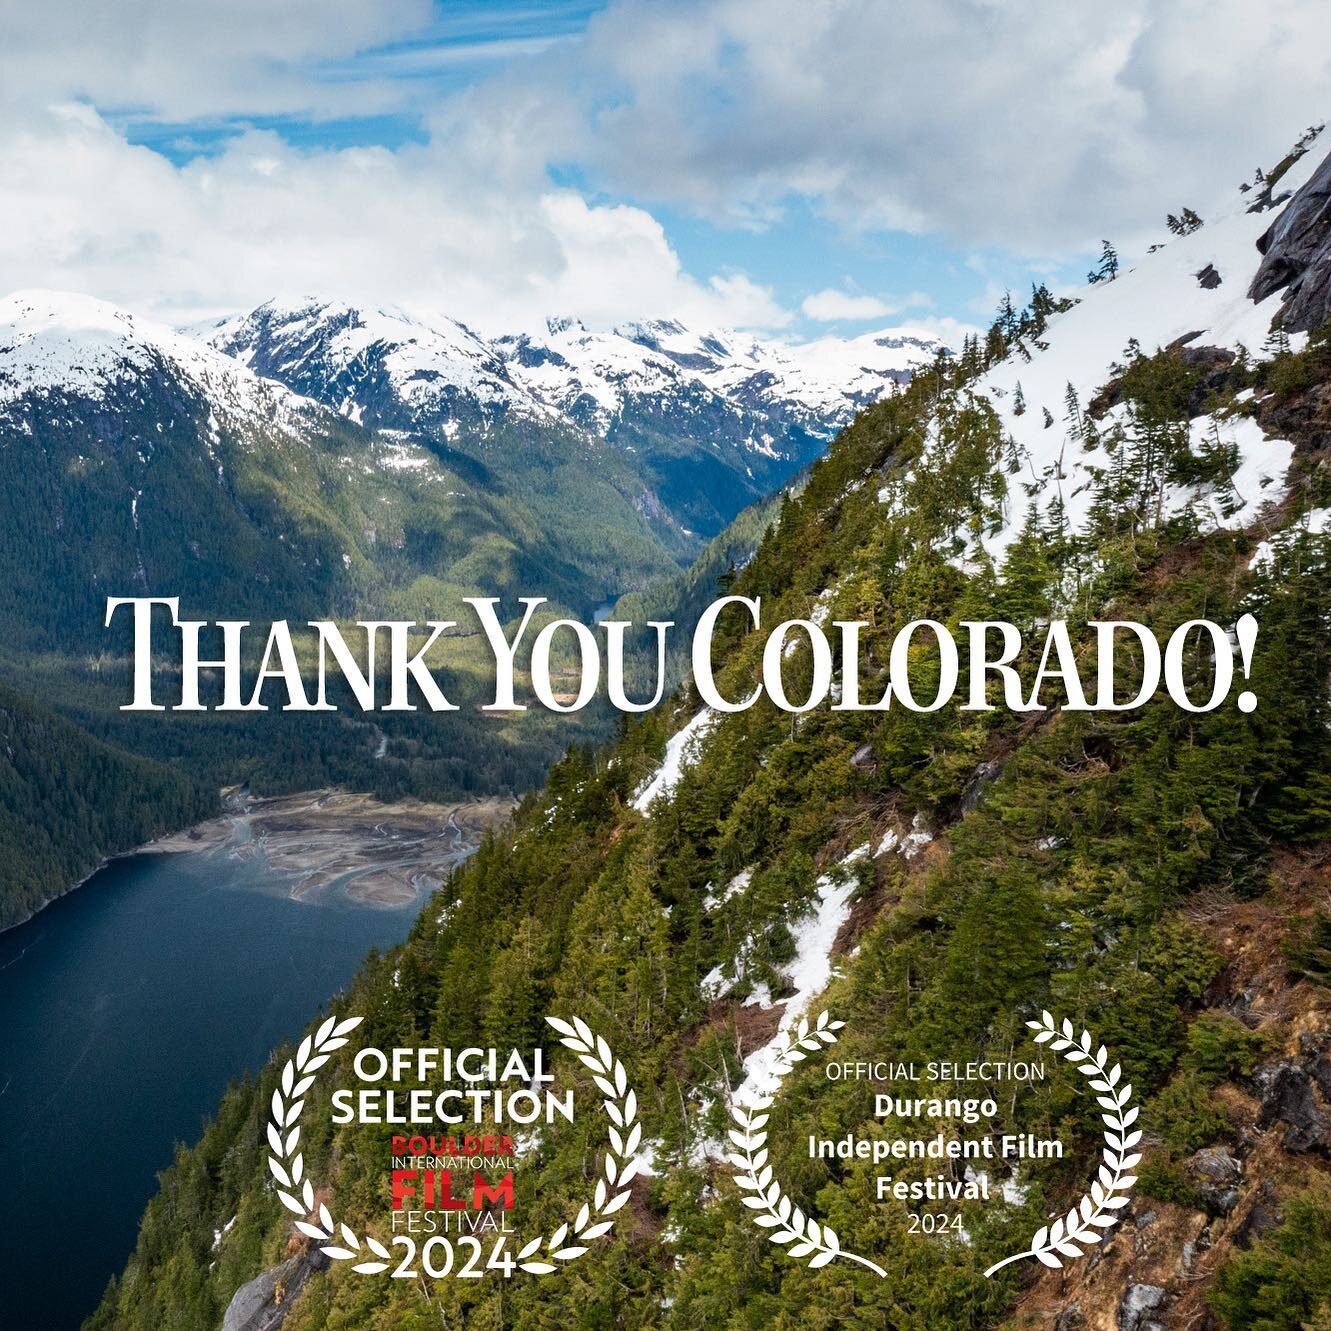 Dear Colorado,

Thank you for having us!! We will be screening this weekend at both the @boulderfilmfestival and the @durangoindependentfilm festival.

Boulder:

TONIGHT (March 1st) at 5pm at the @gracecommonschurch 
Saturday March 2nd at 7:30pm at t